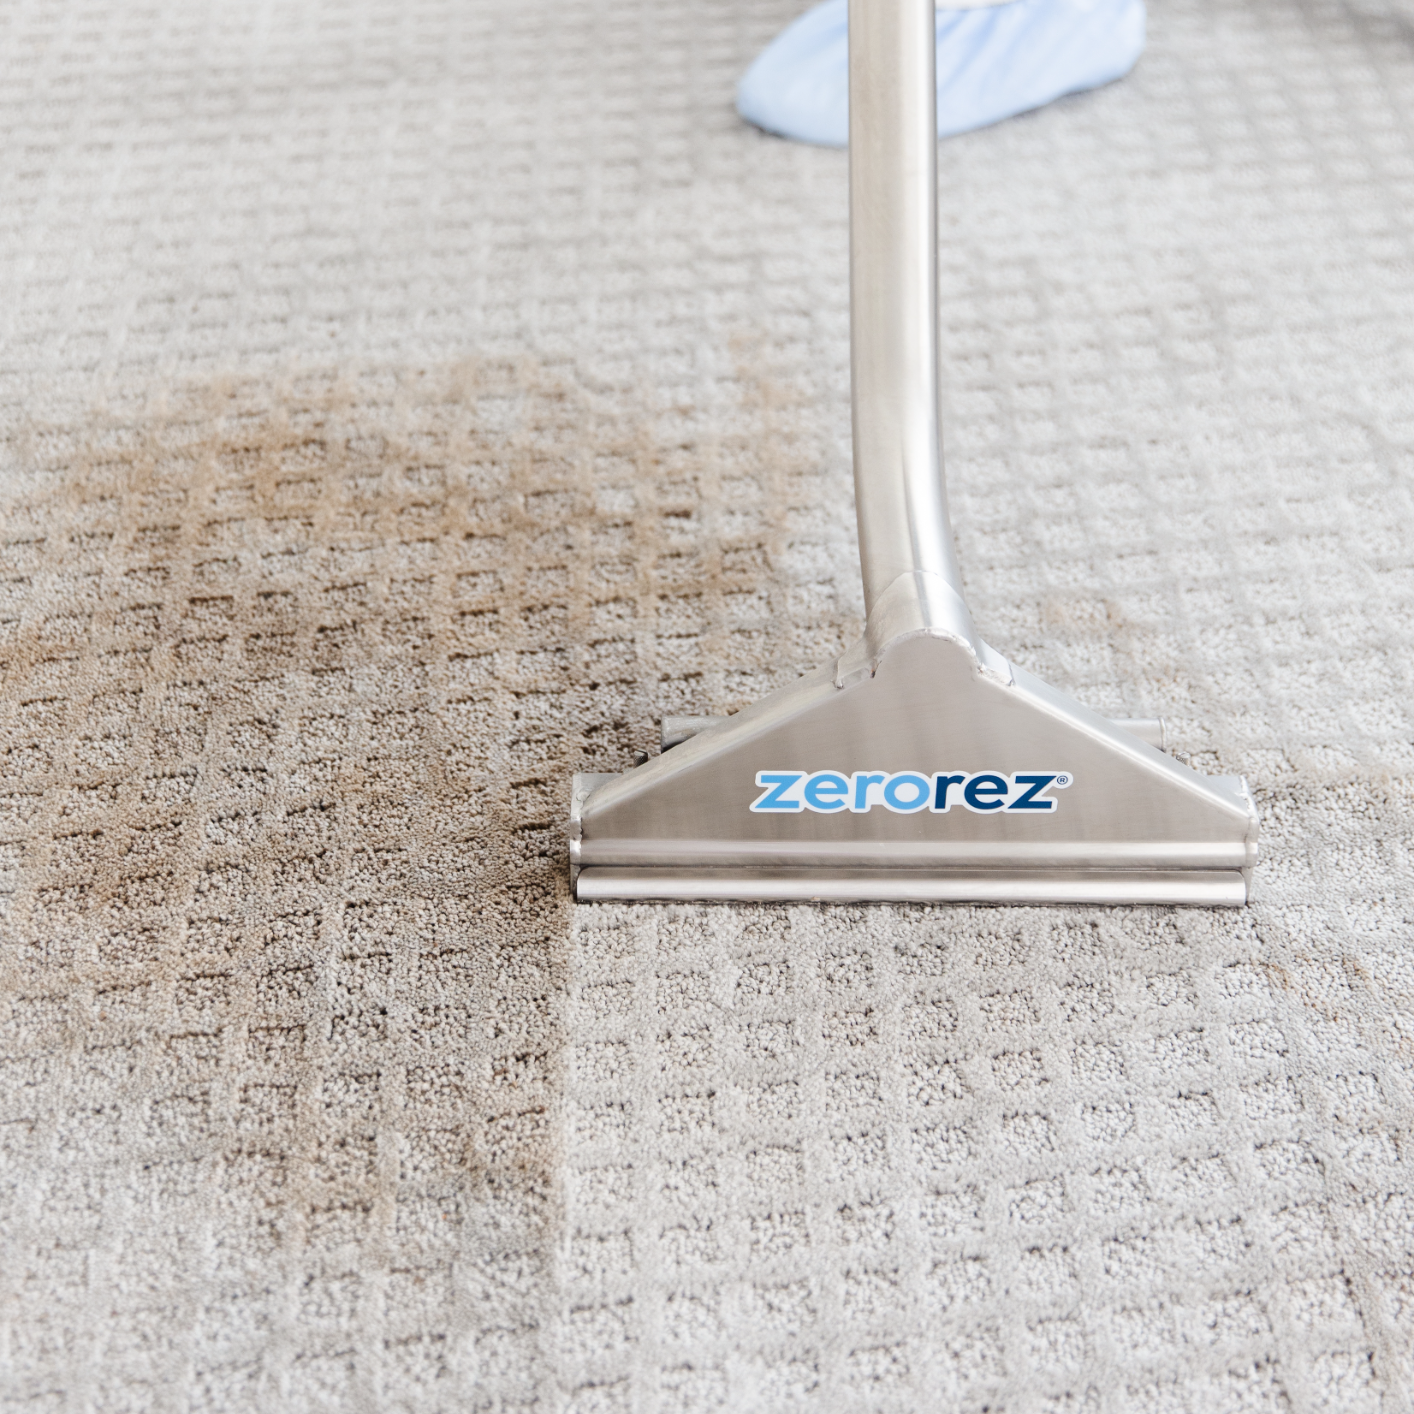 Zerorez professionally removes carpet wicking stains for good with its patented Zr Wand®